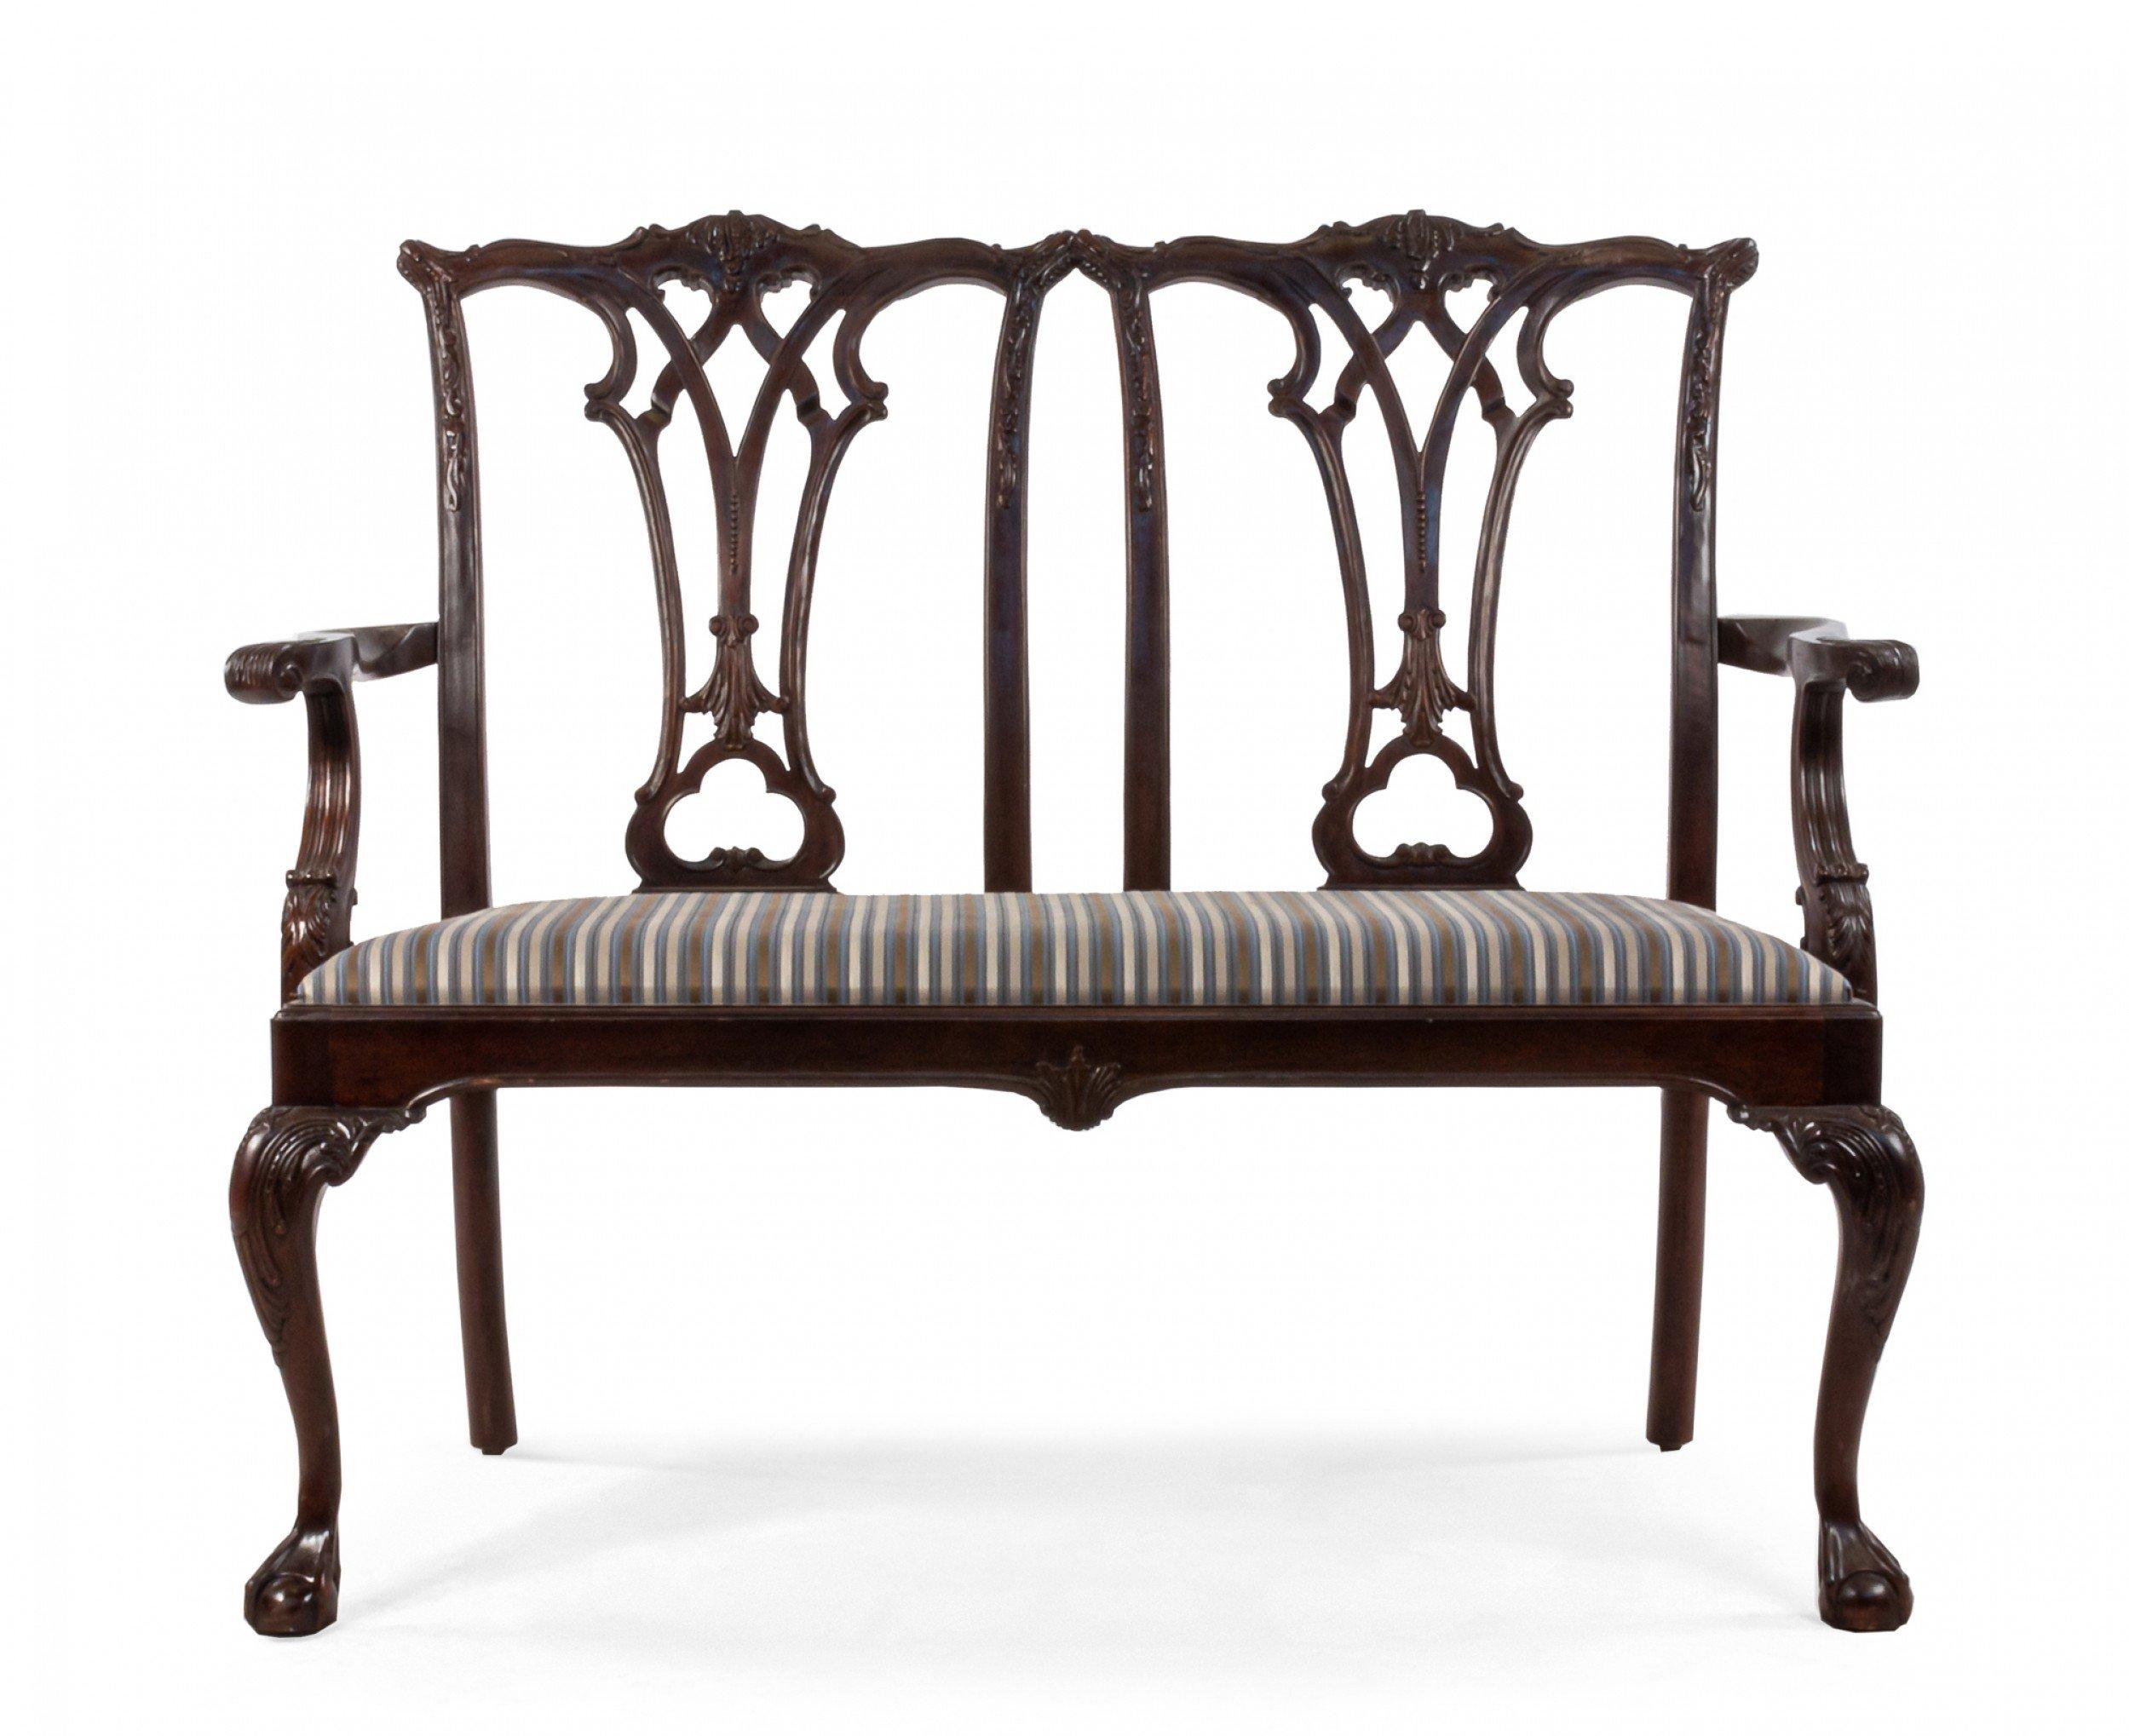 English Chippendale style (late 19th Century) mahogany loveseat with open carved double chair back having beige and blue striped upholstered seat supported on cabriole legs with ball and claw feet.